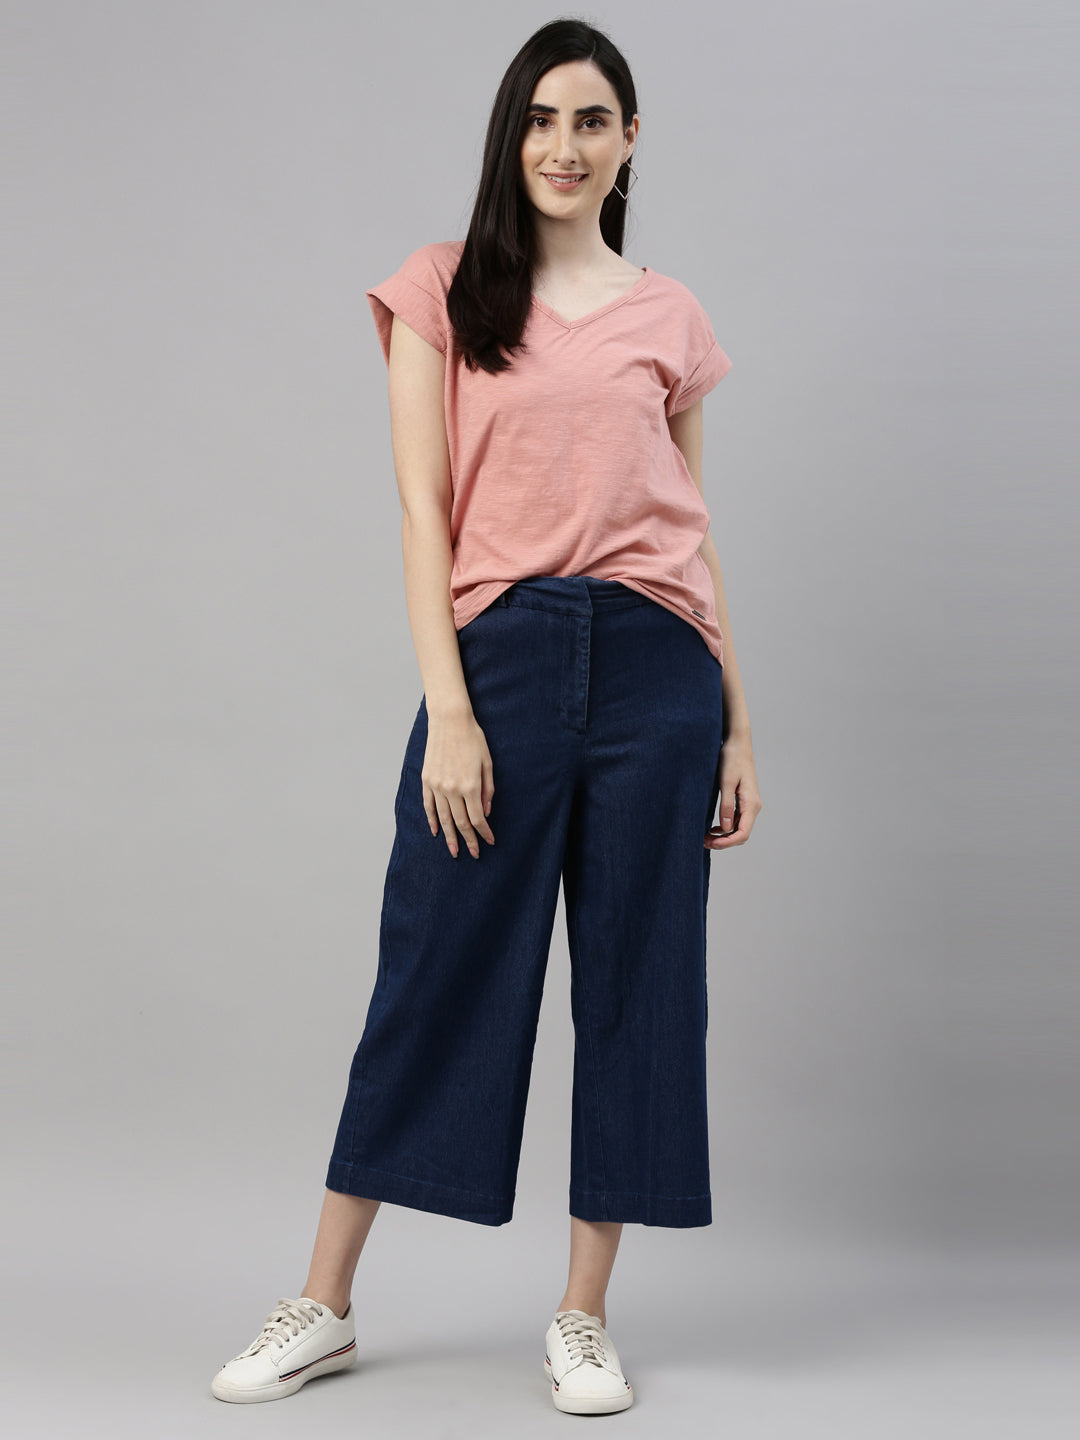 Stylish Linen Culottes for Women with Side Pockets - Go Colors